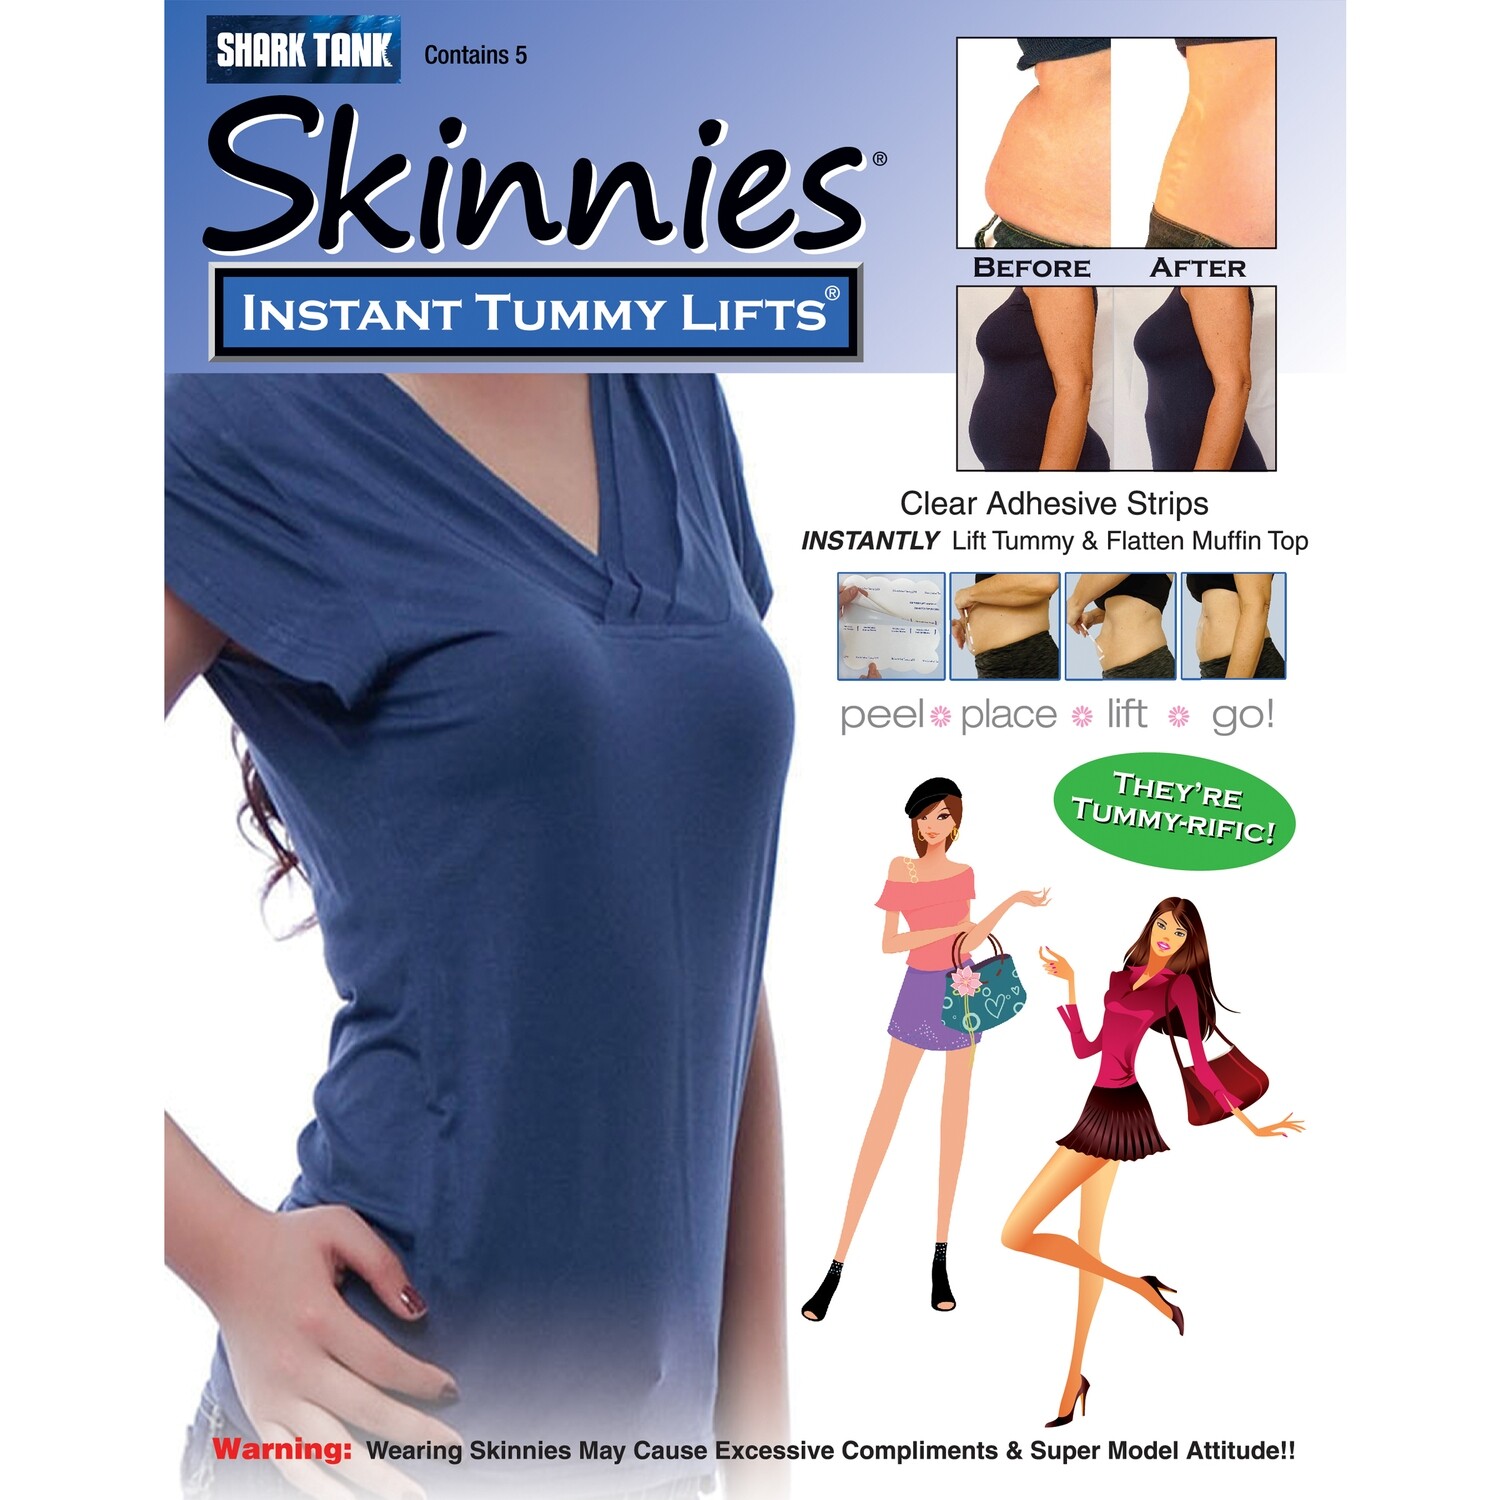 NEW Instant Tummy Lift  Takes 3-4" off instantly